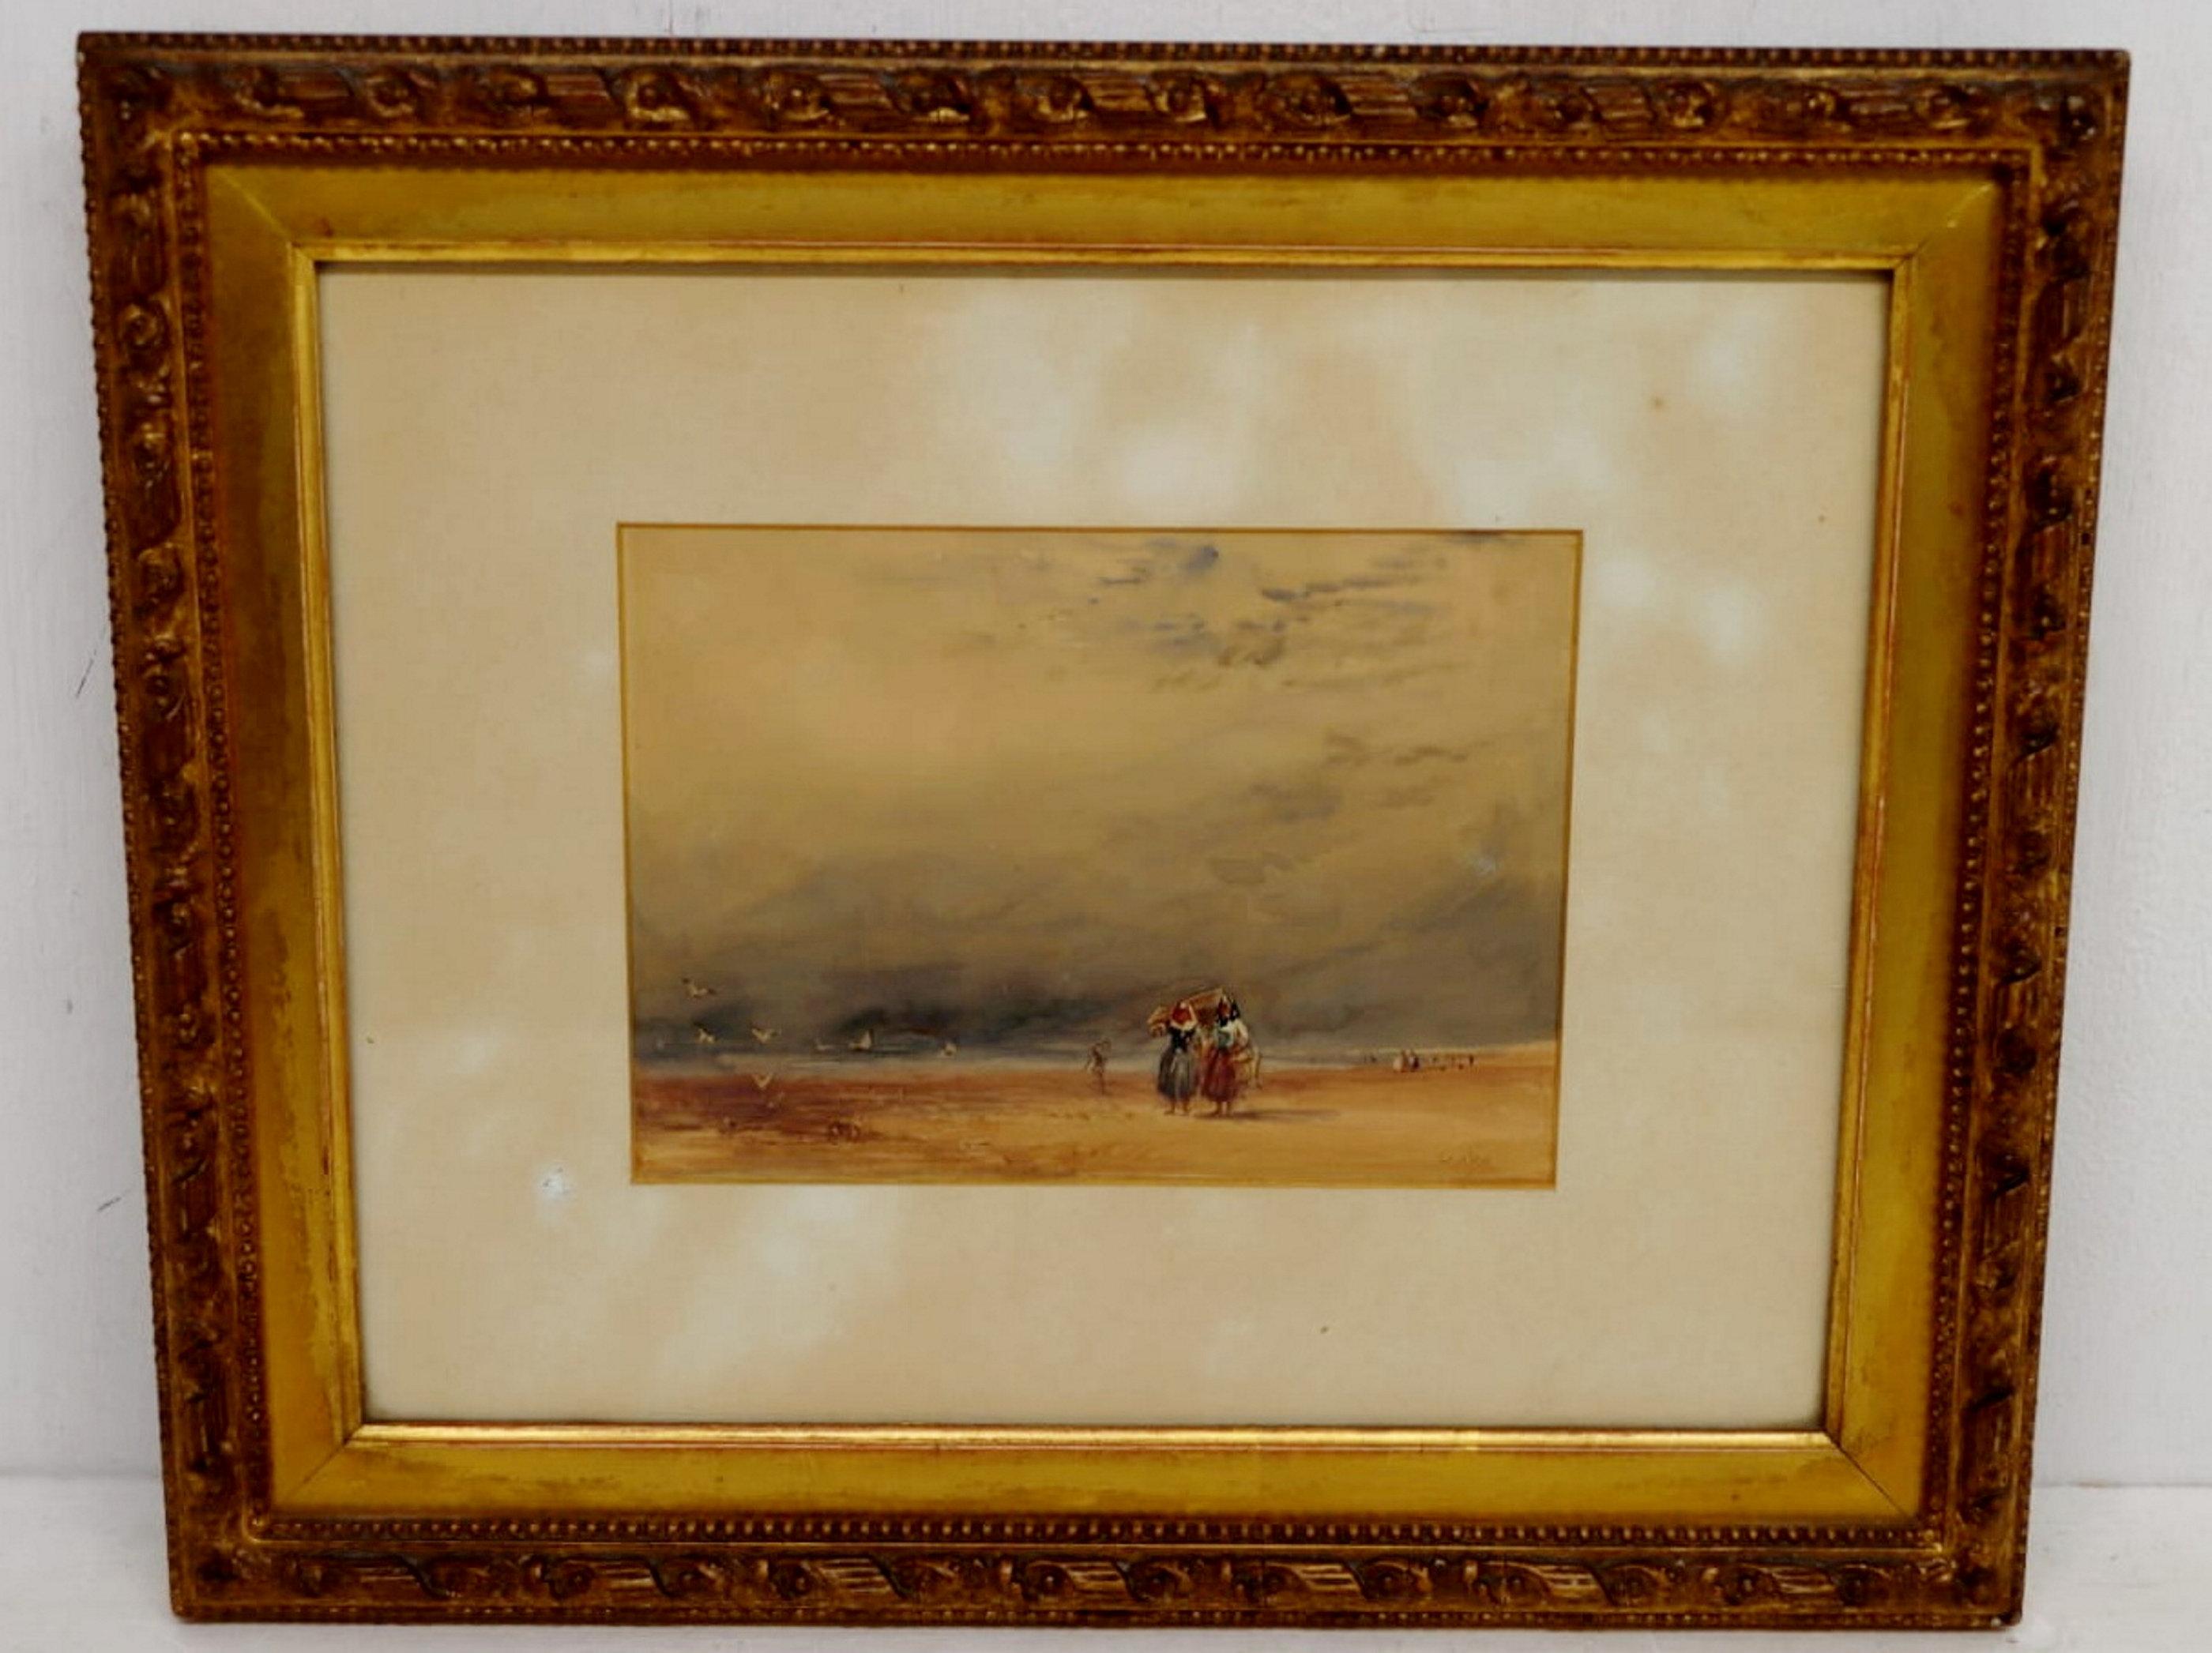 The painting was sold to an anonymous UK bidder